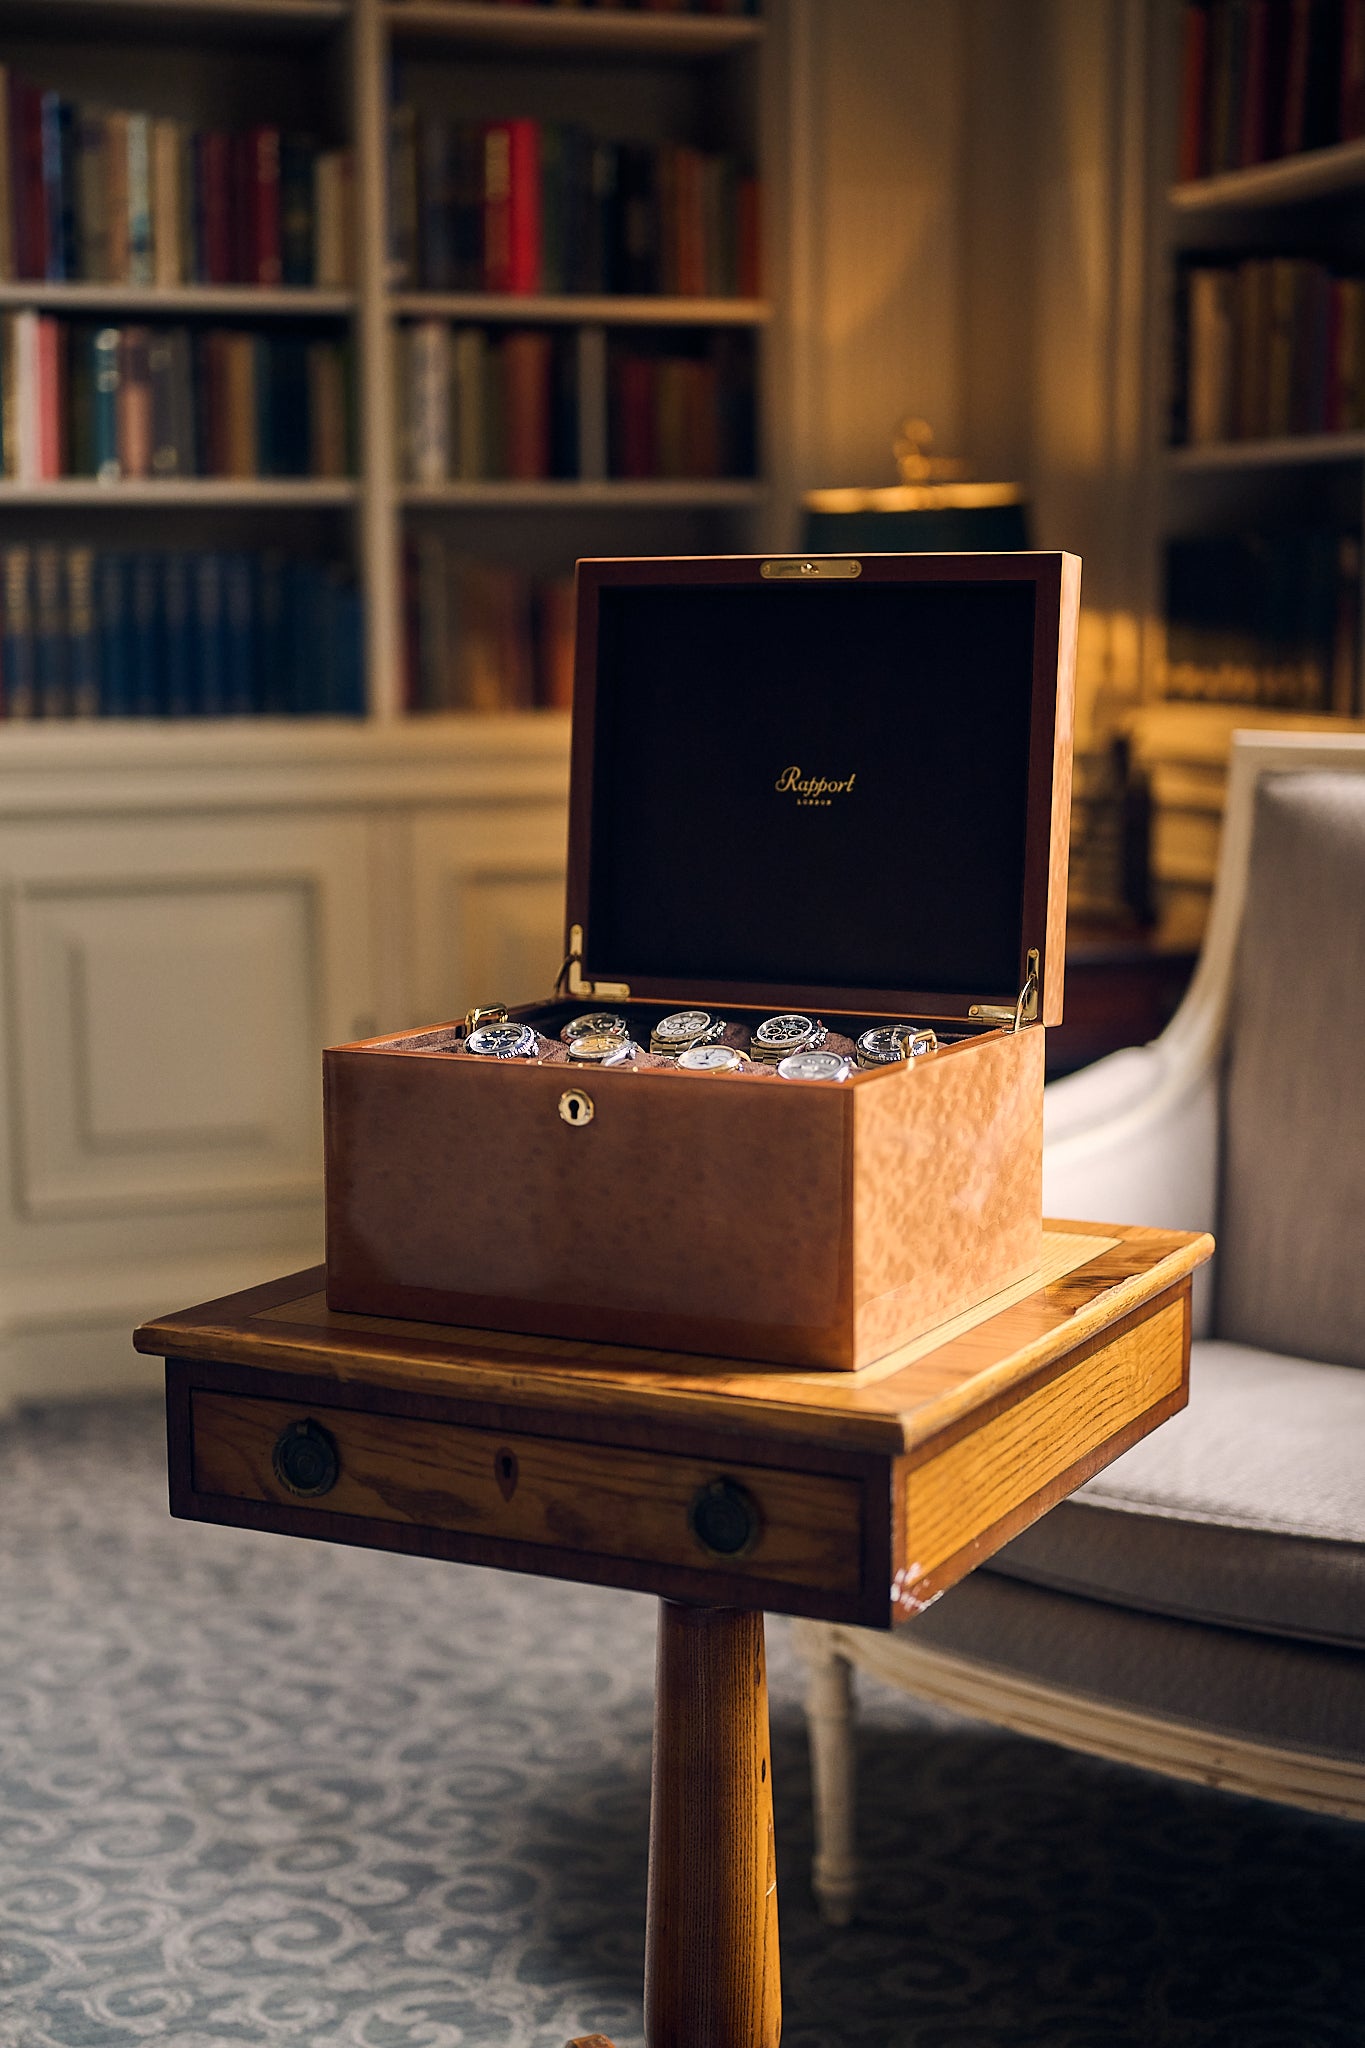 Article: Why Rapport Watch Boxes?